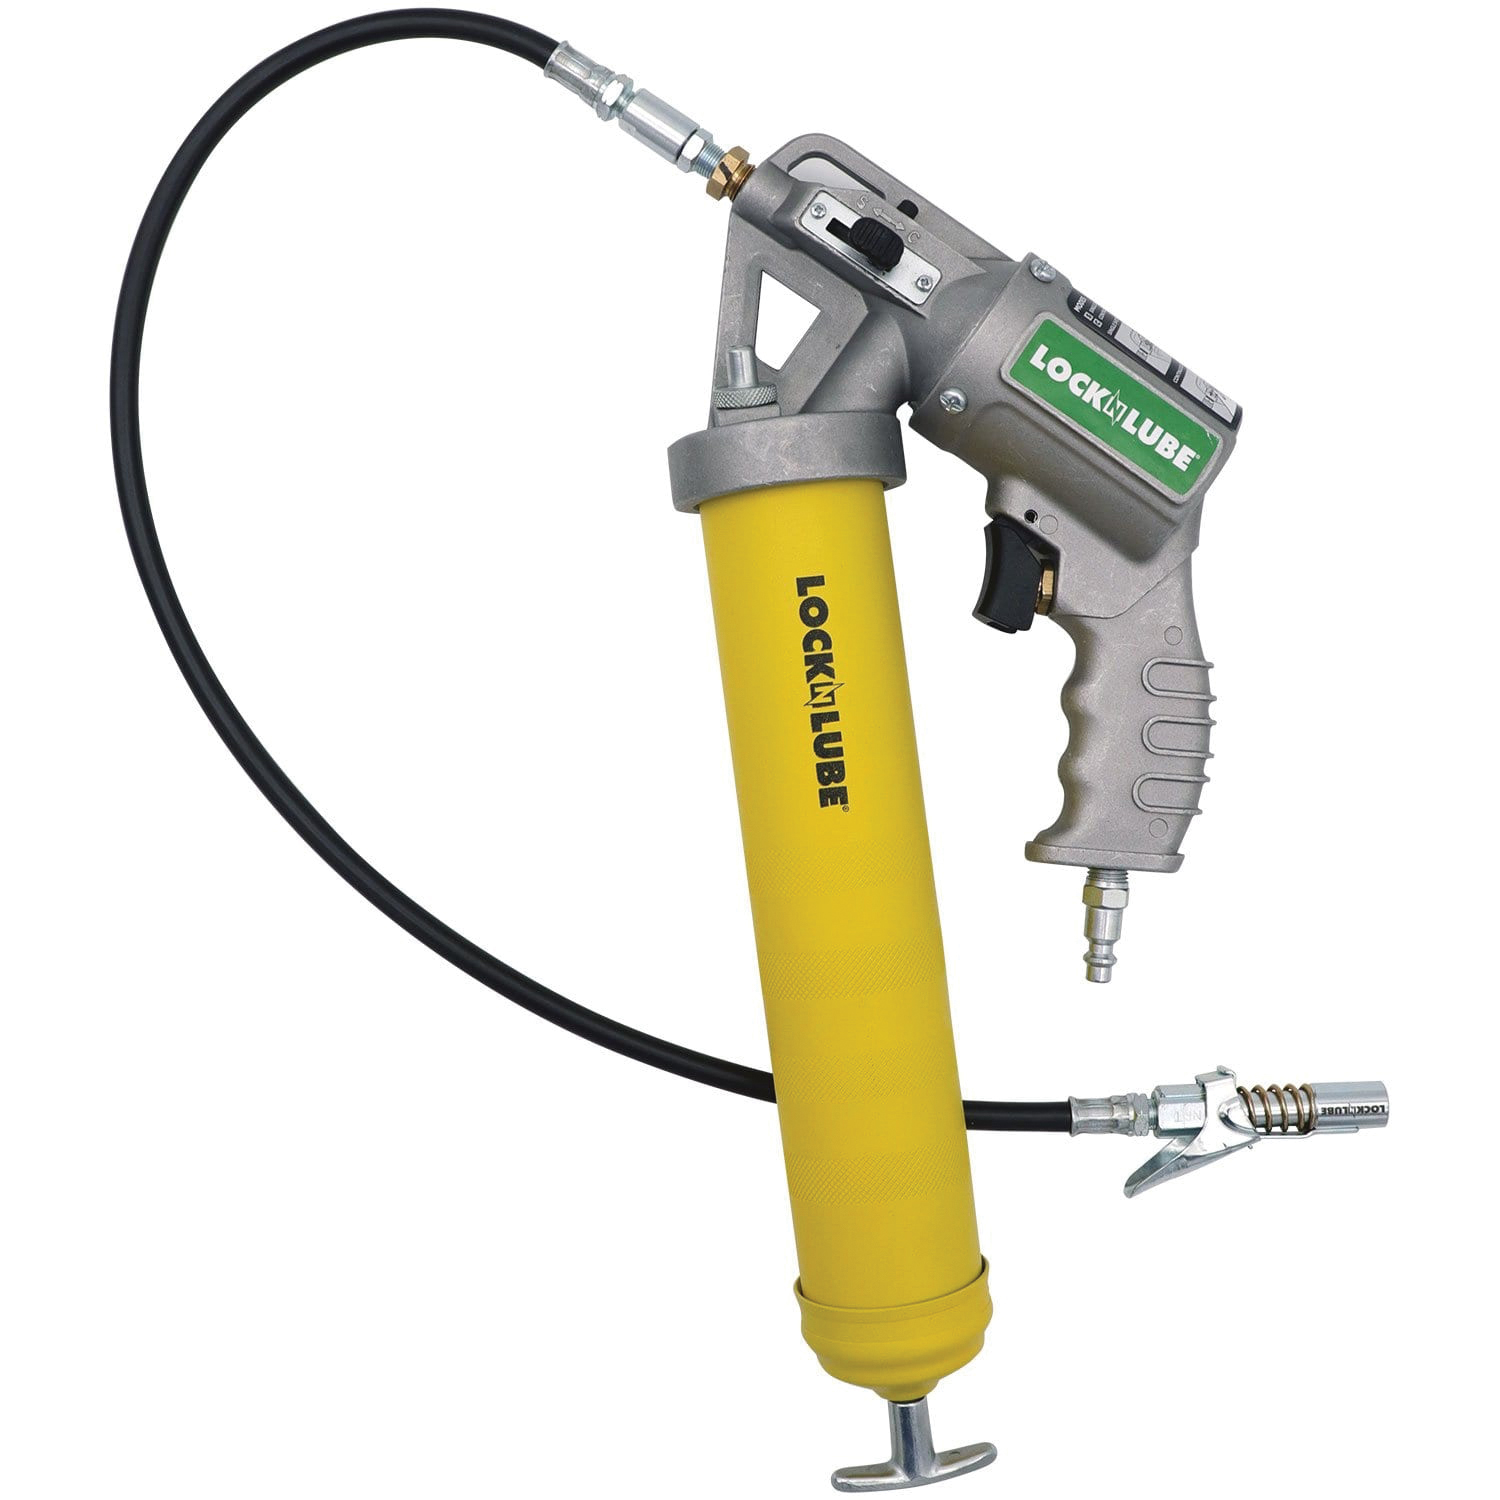 LOCKNLUBE® LNL262 2-in-1 Pneumatic Grease Gun With Single Shot, Continuous Mode, 16 oz Cartridge, 6000 psi Grease Outlet